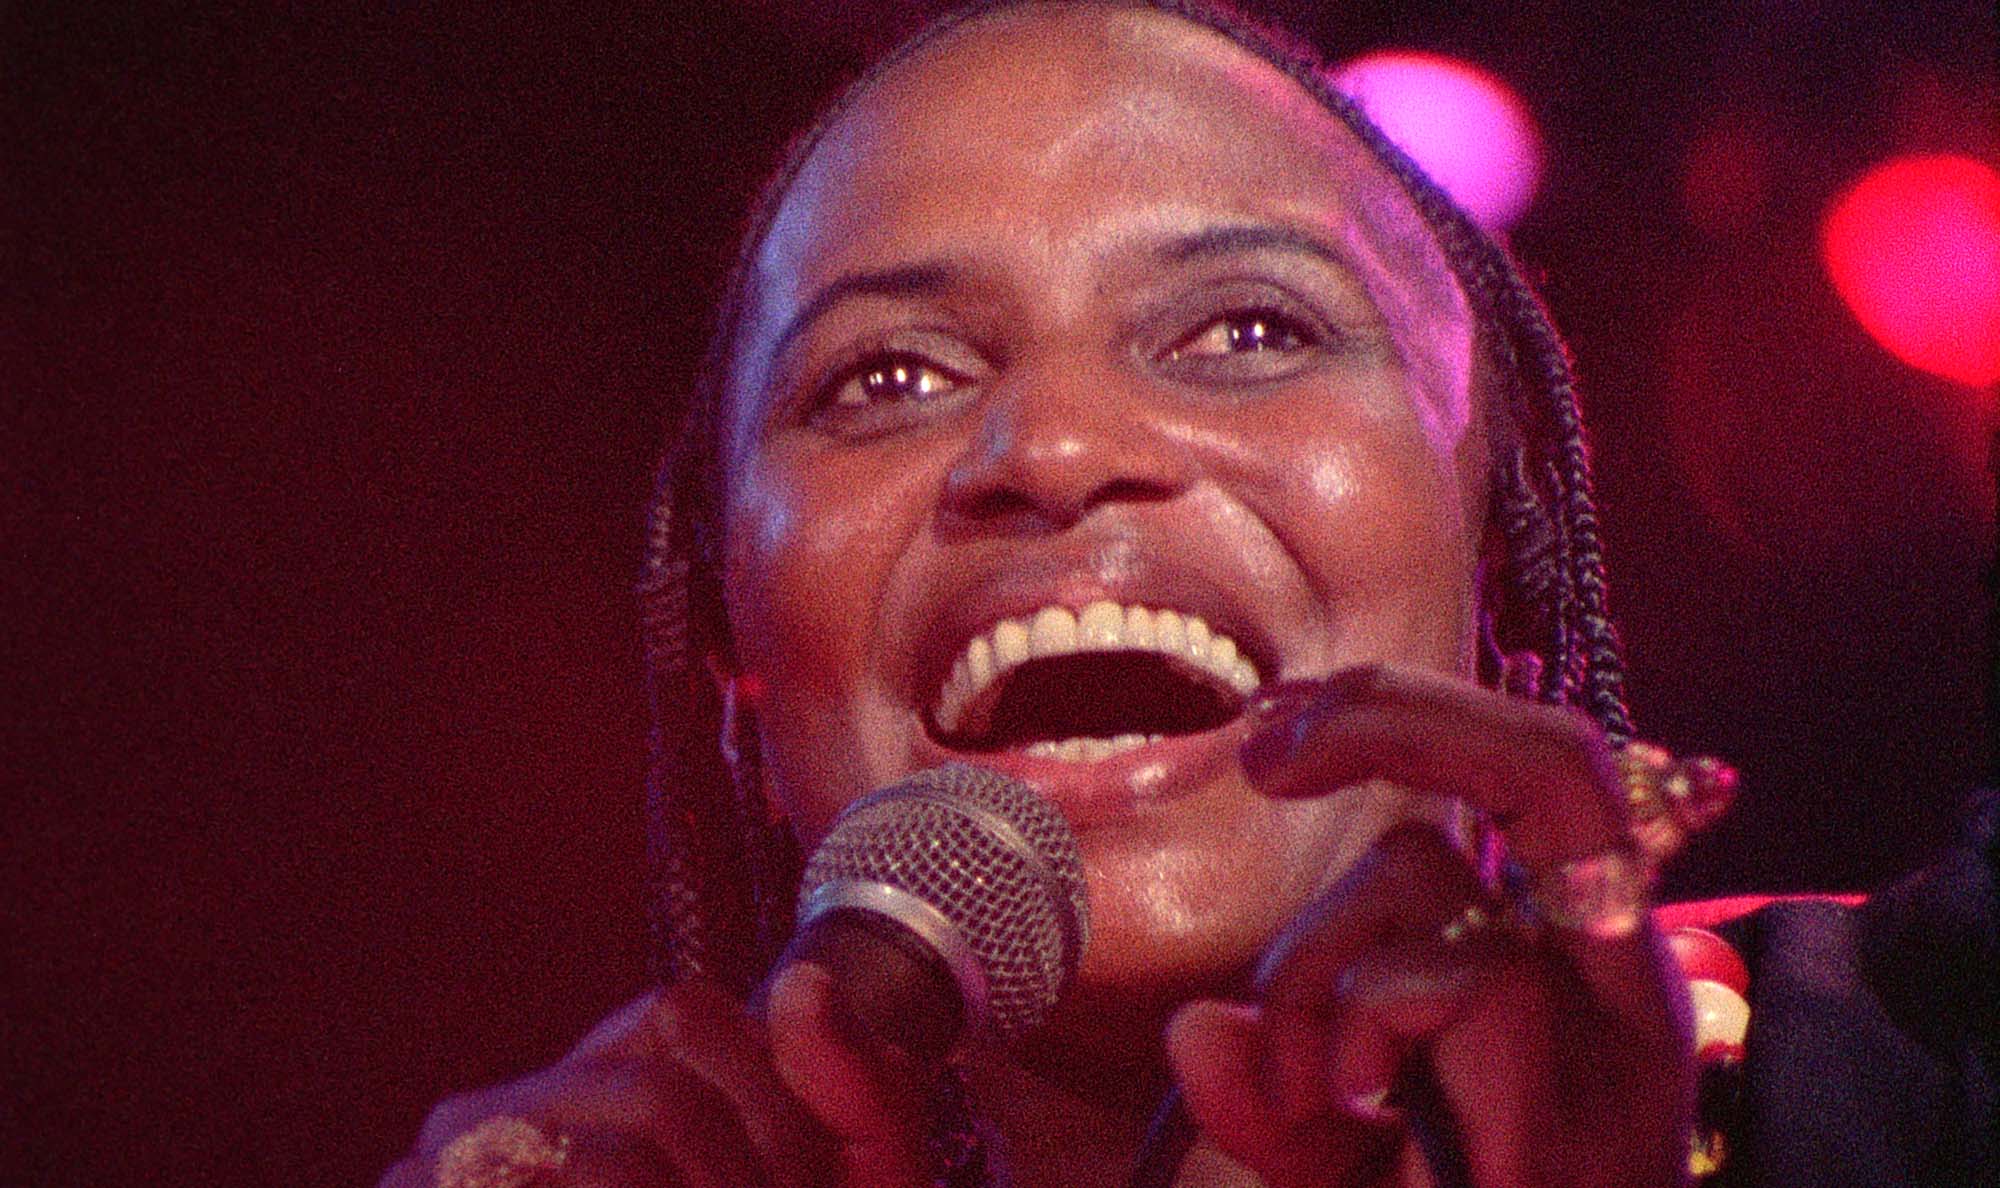 Legendary South African singer Miriam Makeba is highlighted in Mika Kaurismaki's straightforward documentary 'Mama Africa'. Through a series of rare archival footage and testimonies of her contemporaries, now fans can reminisce and new generations discover the woman who brought peace through song.